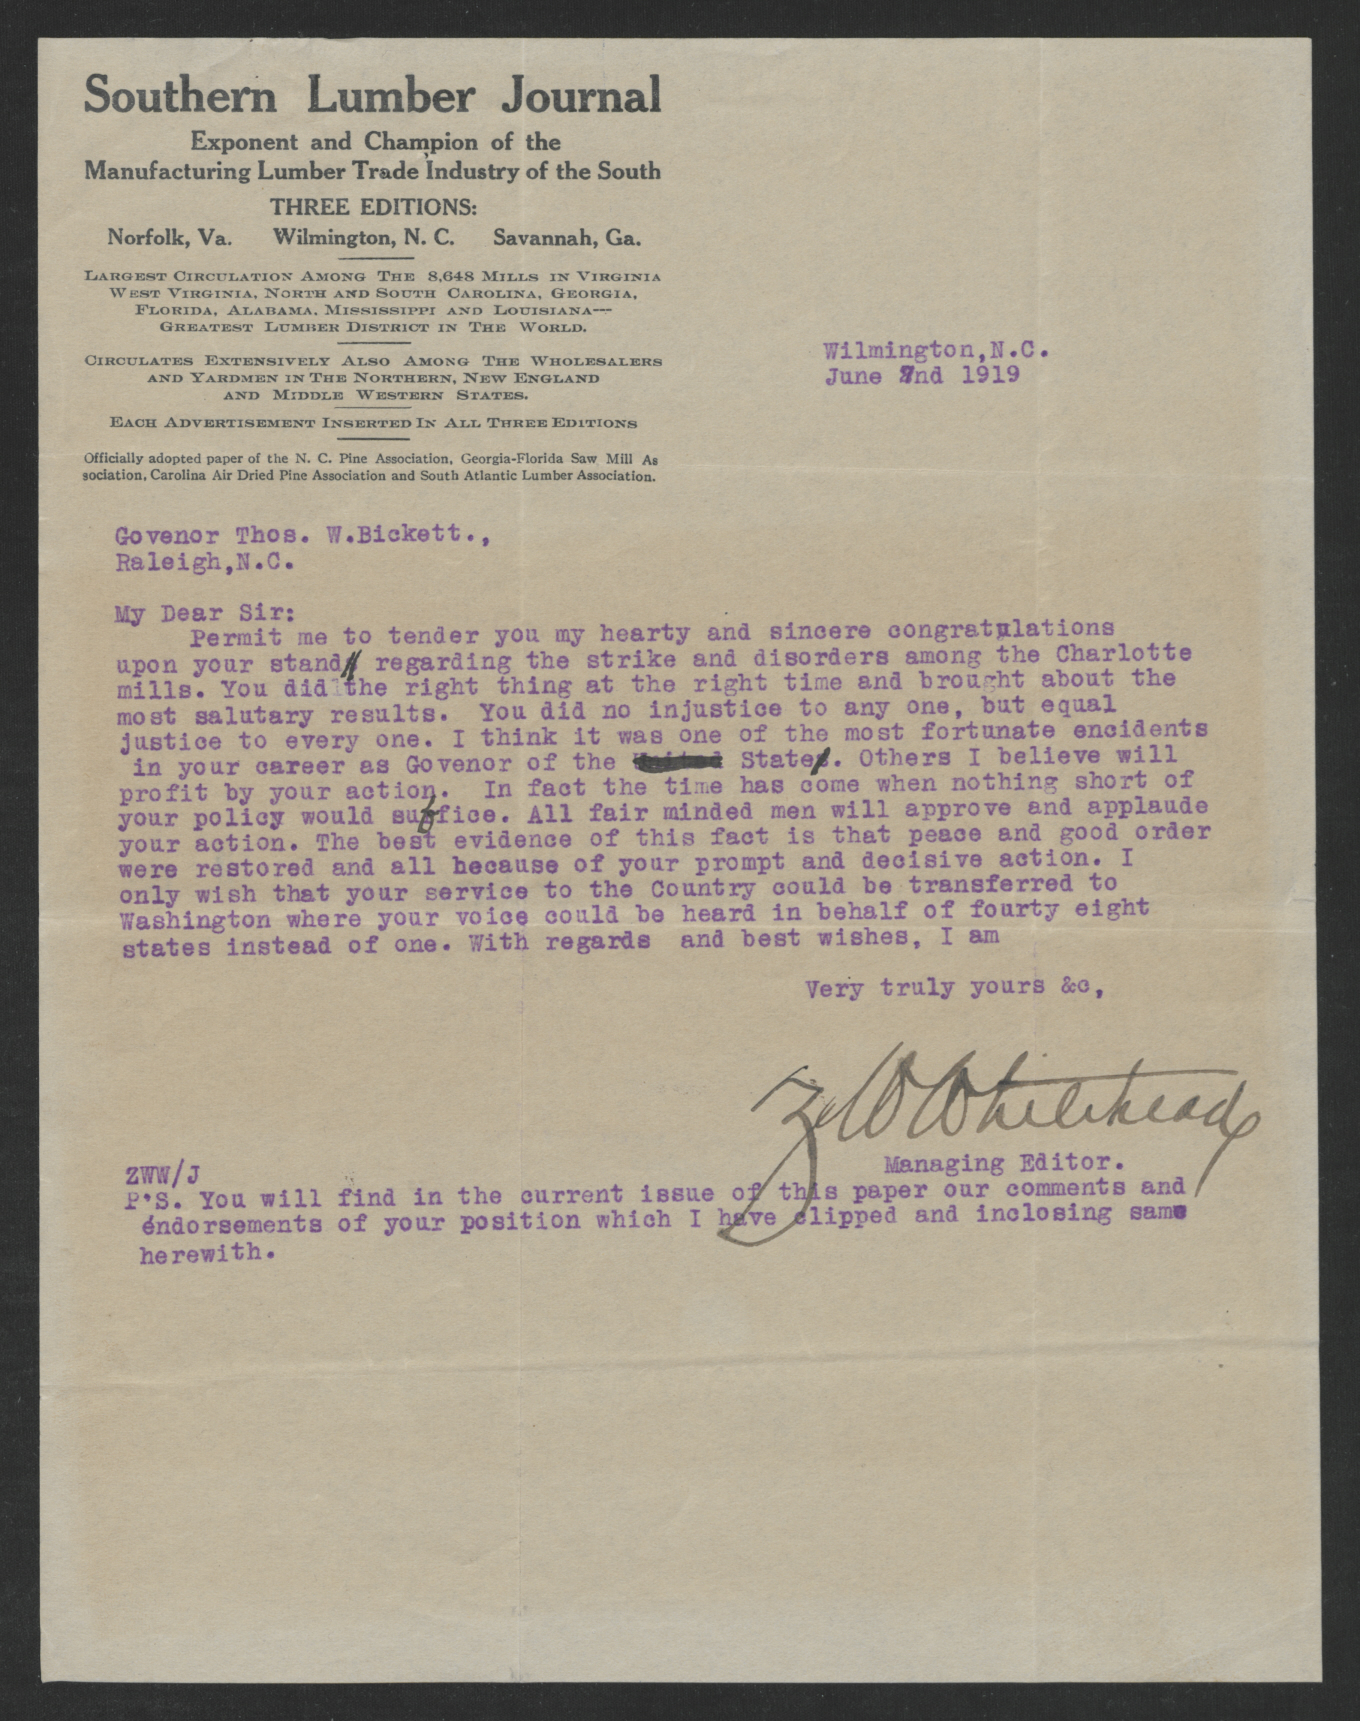 Letter from Zollicoffer W. Whitehead to Thomas W. Bickett, June 7, 1919